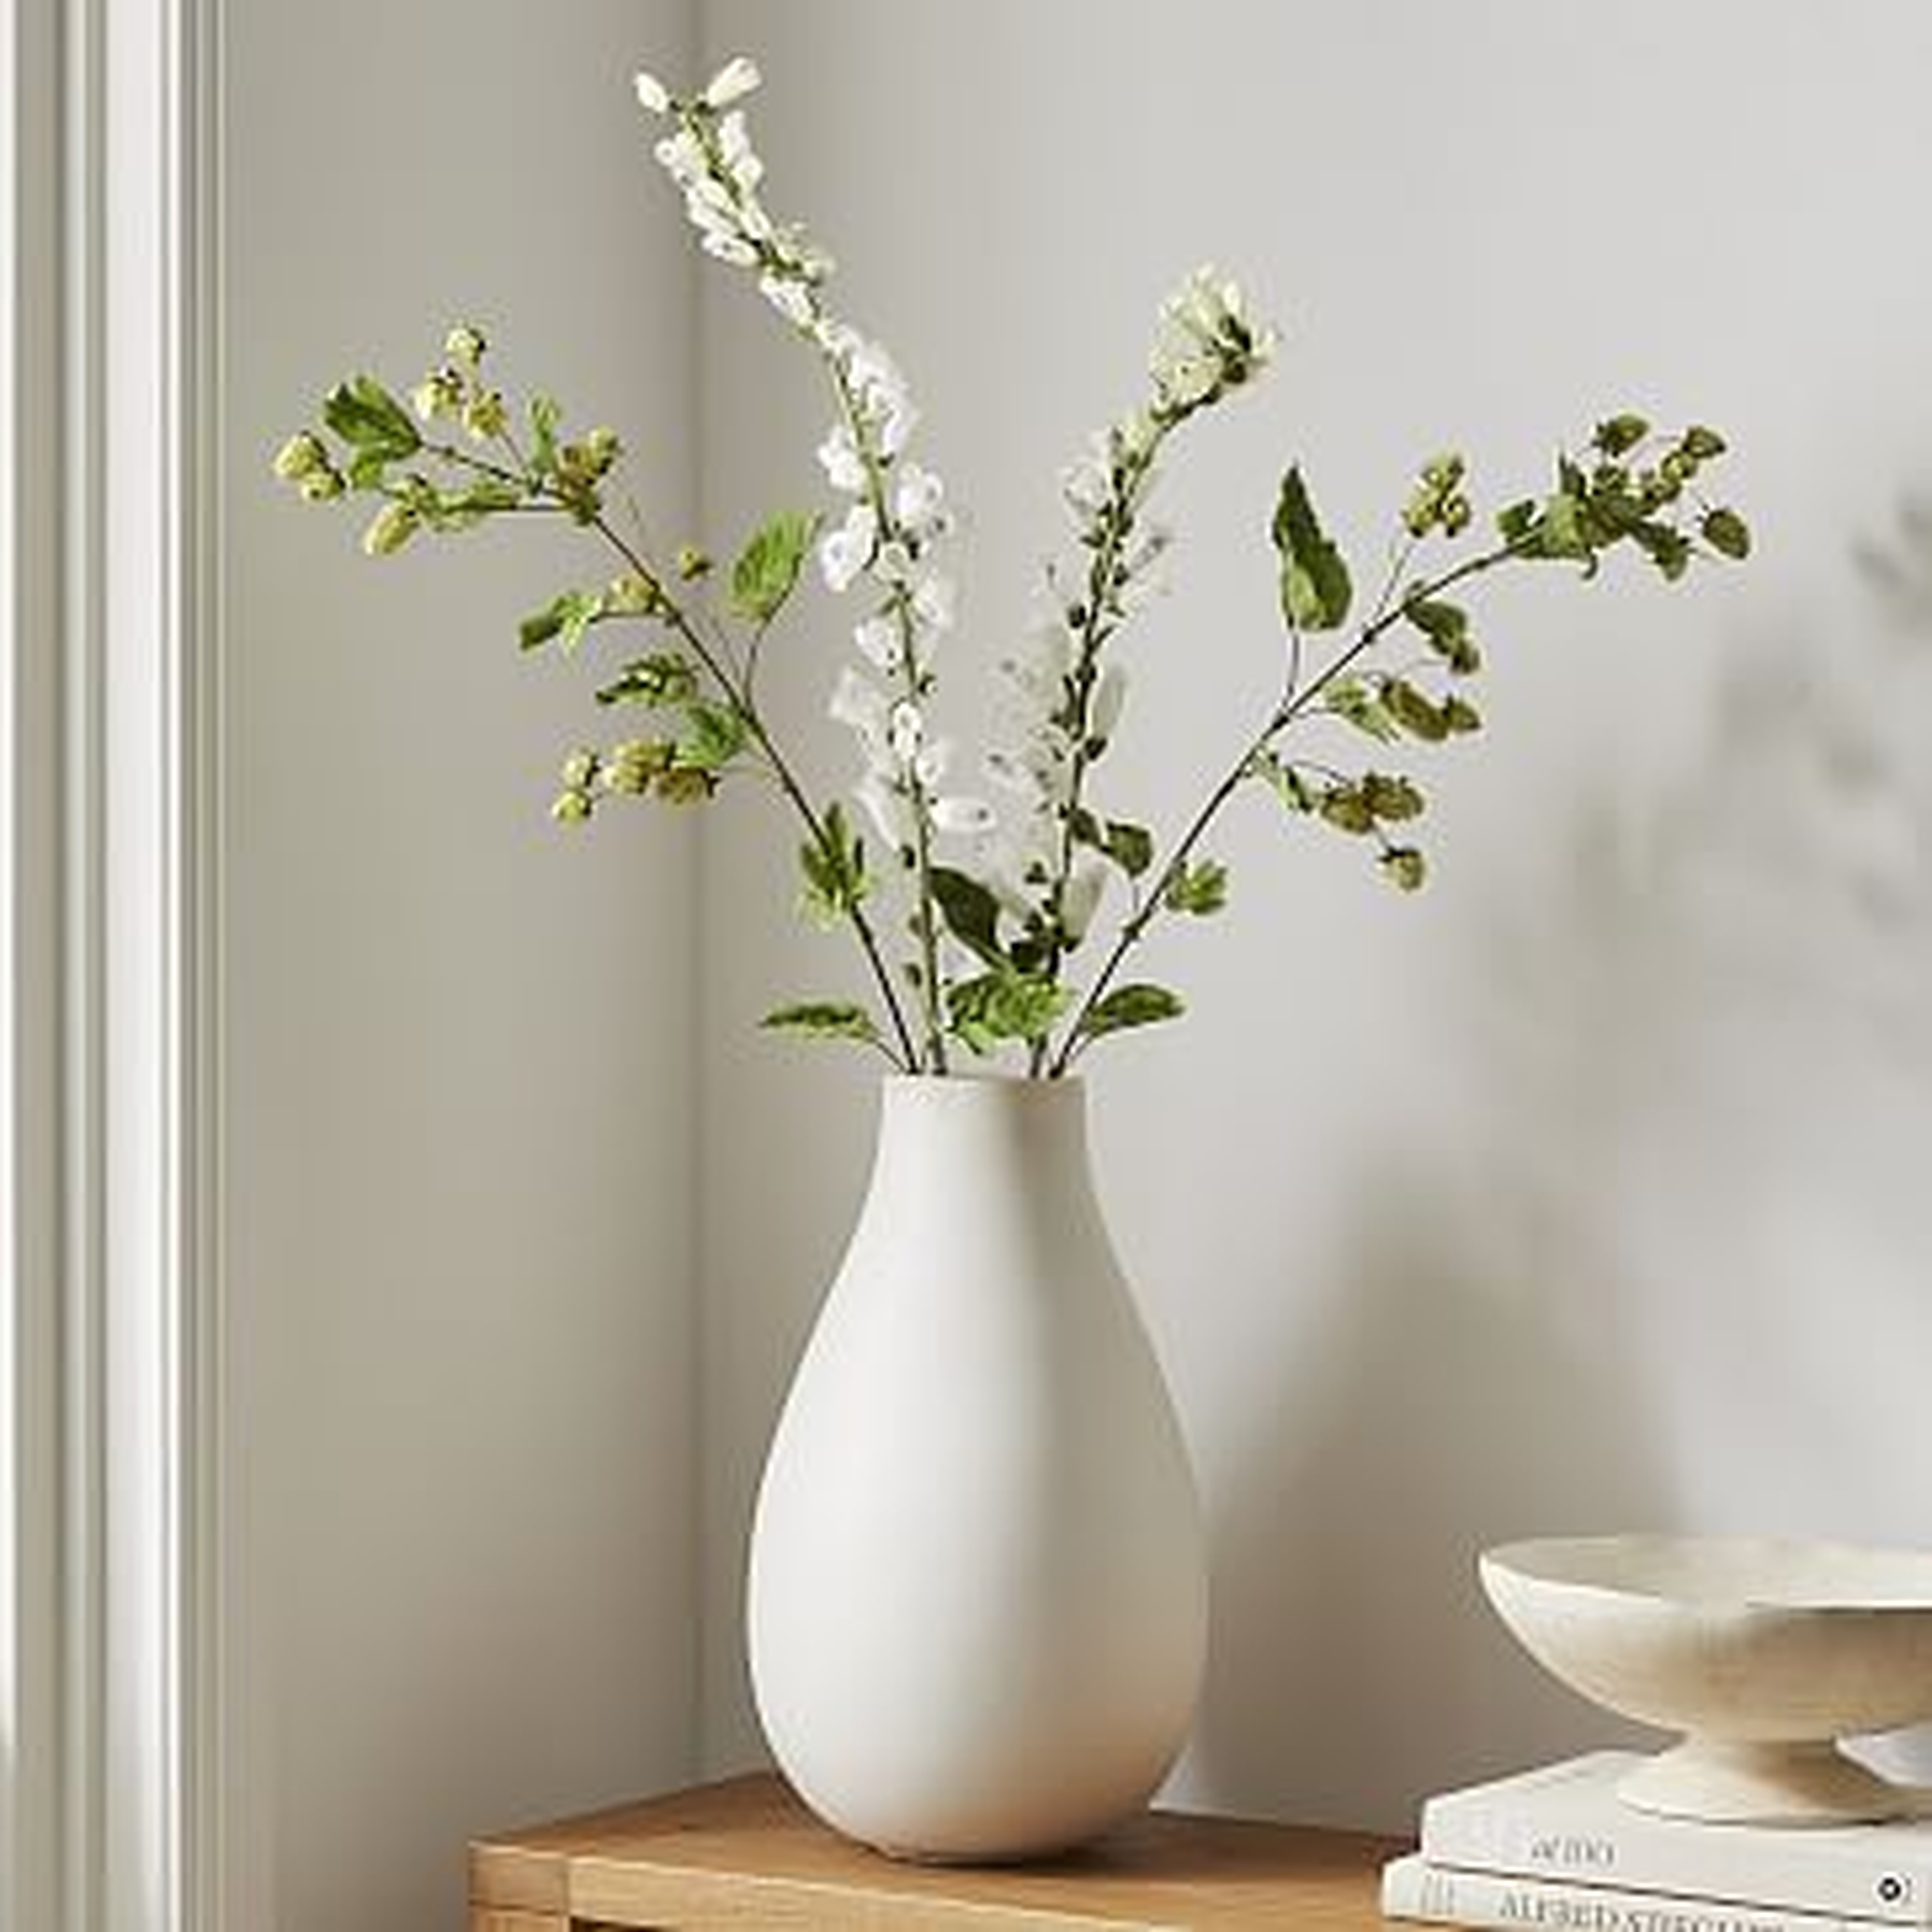 Hops and Fox Glove Branches Bundle - West Elm